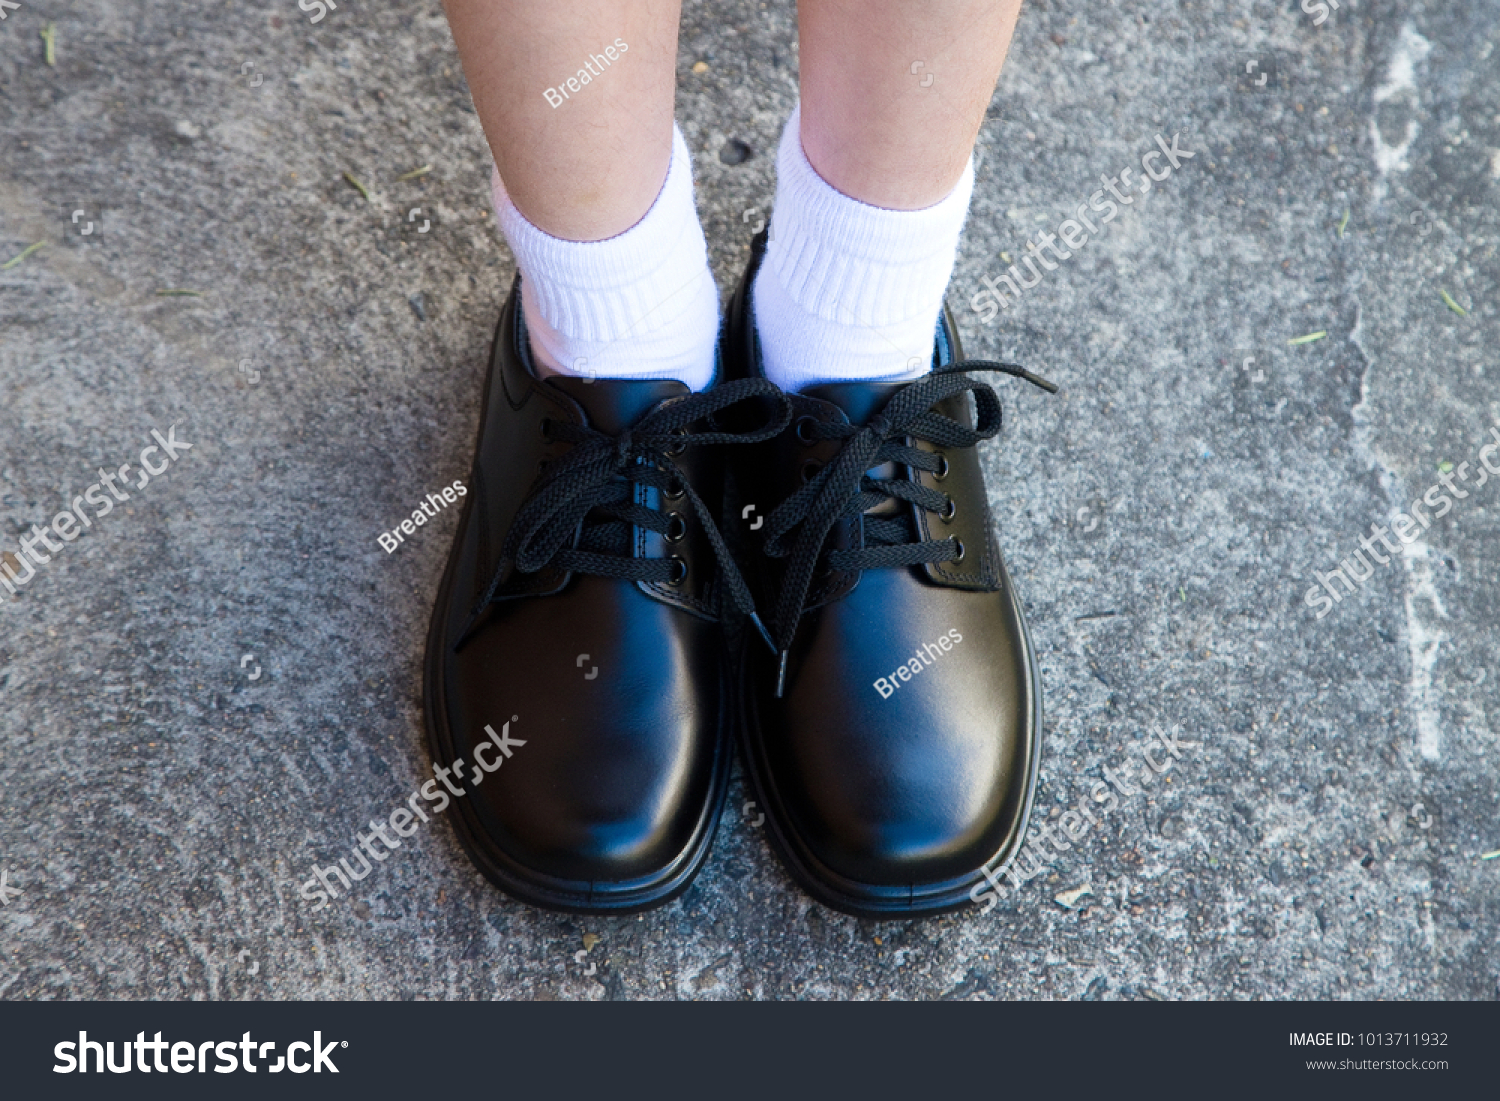 black and white school girl shoes